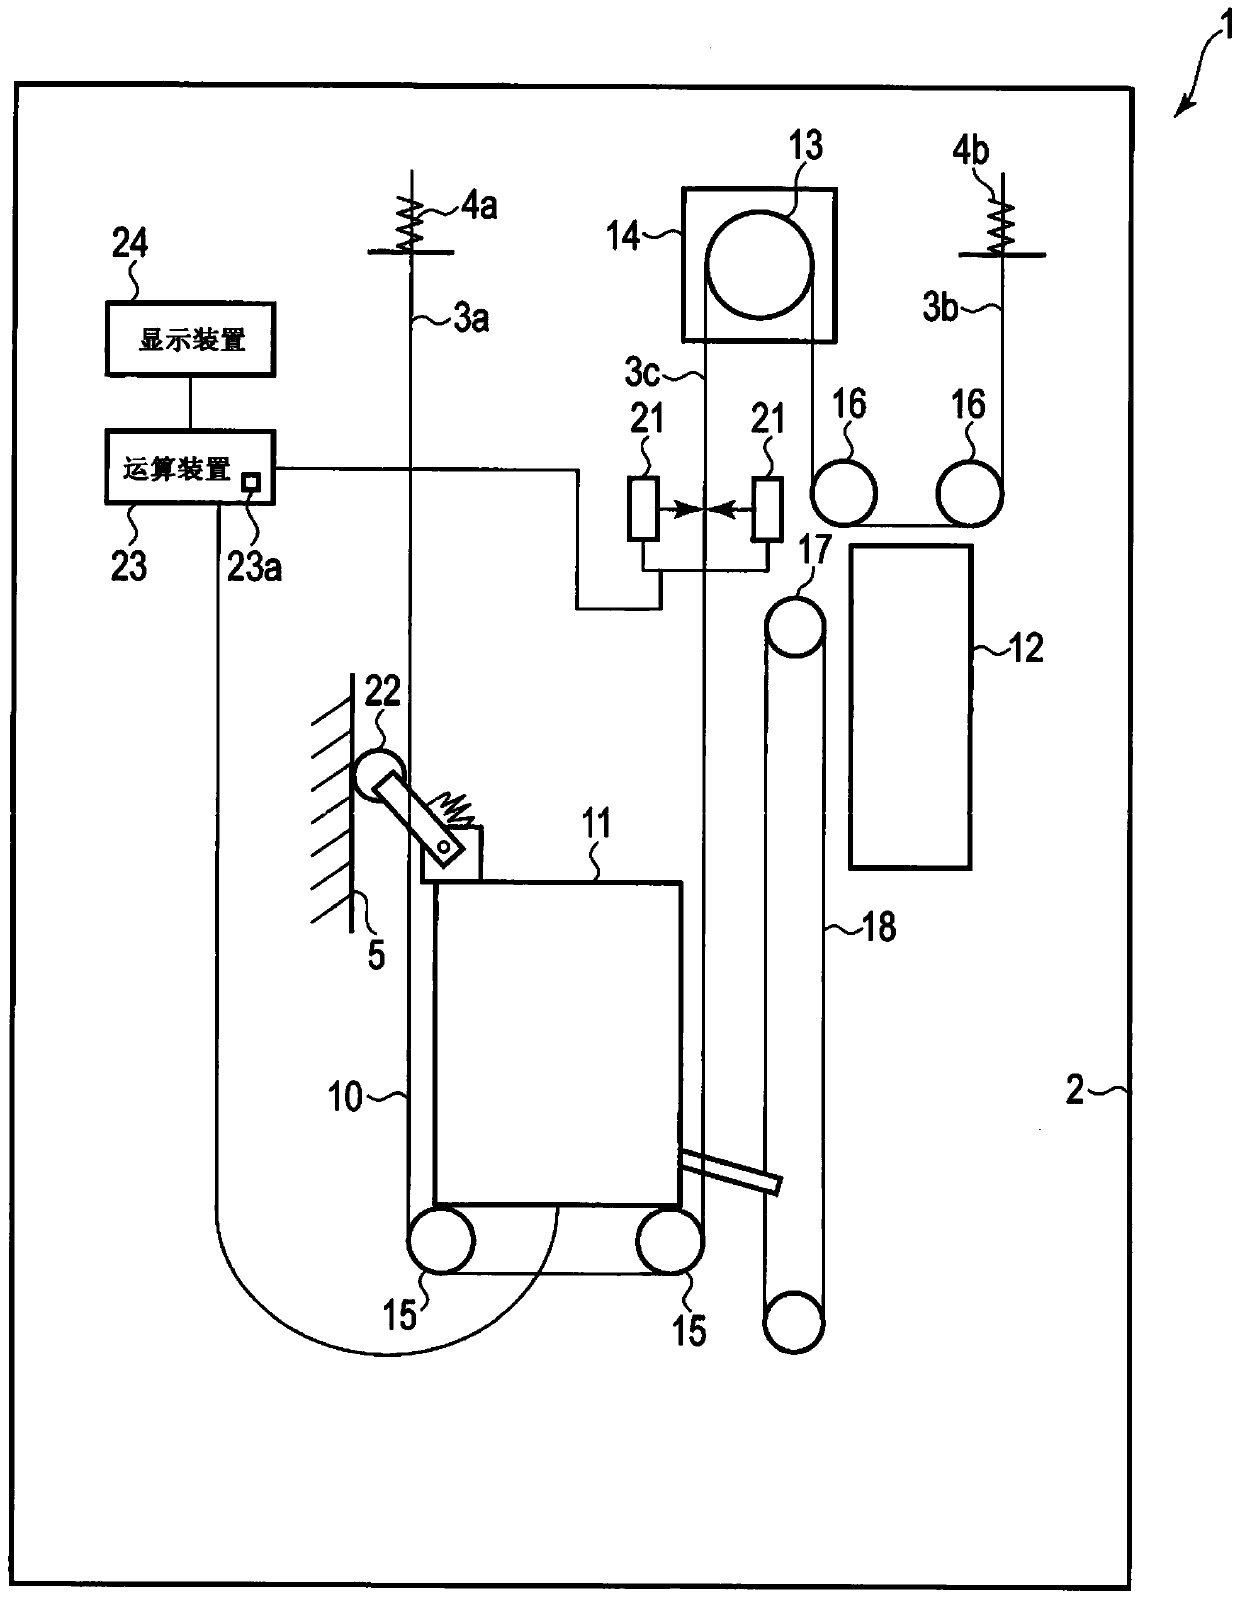 Elevator cable inspection system